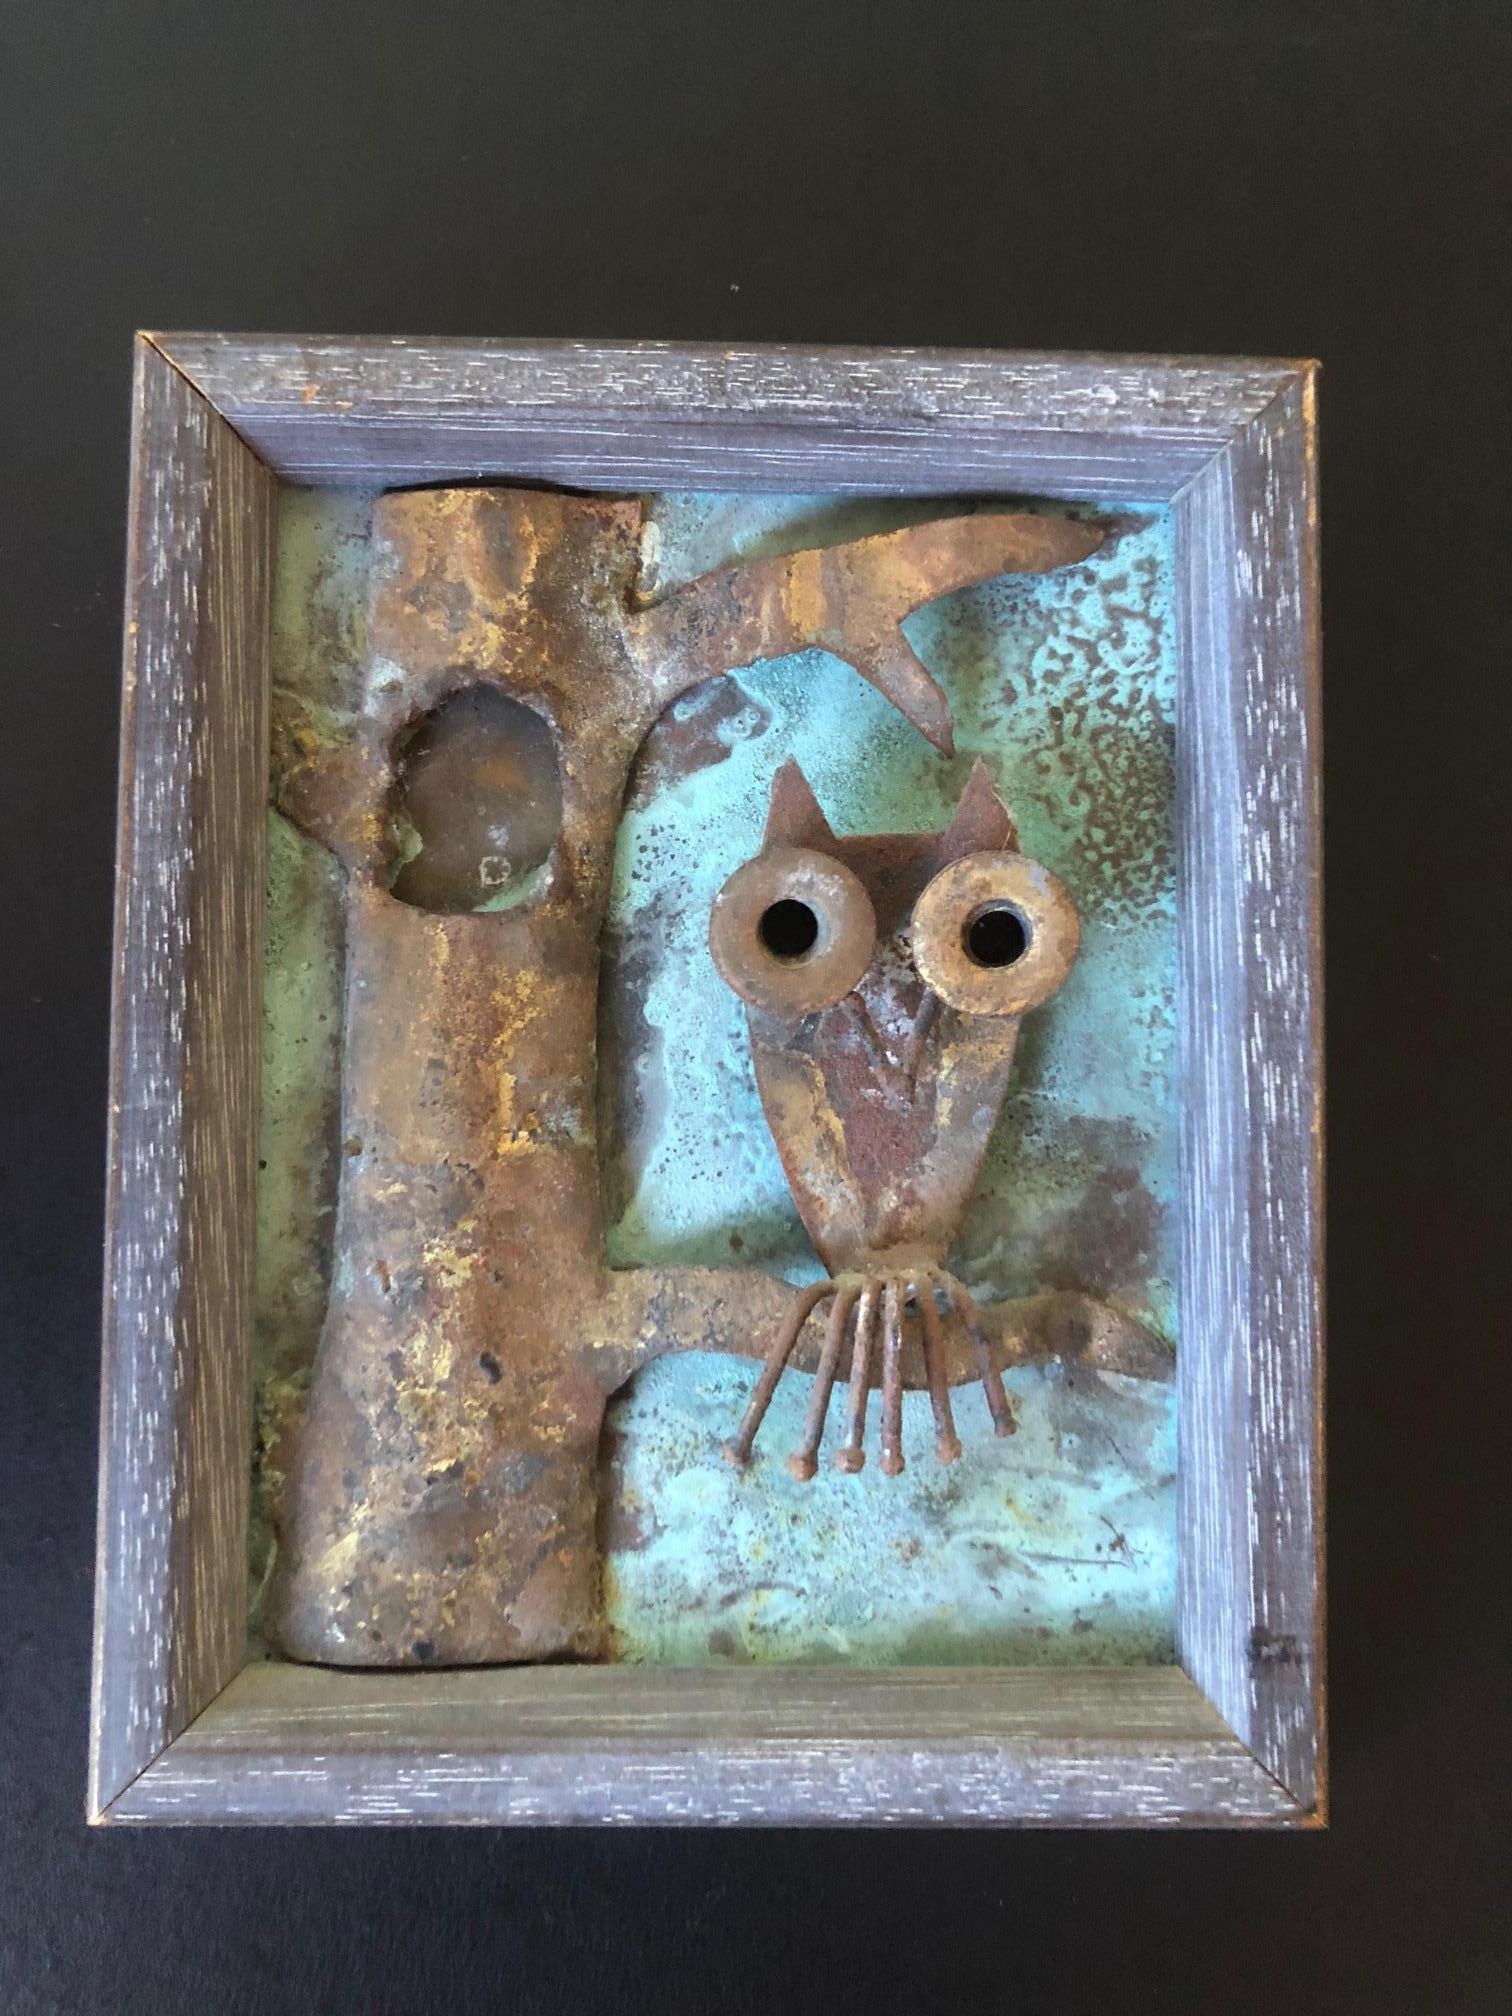 Striking midcentury art piece of an owl in a tree made of brass and bronze in a small frame. The piece is well done and has a great vintage patina.